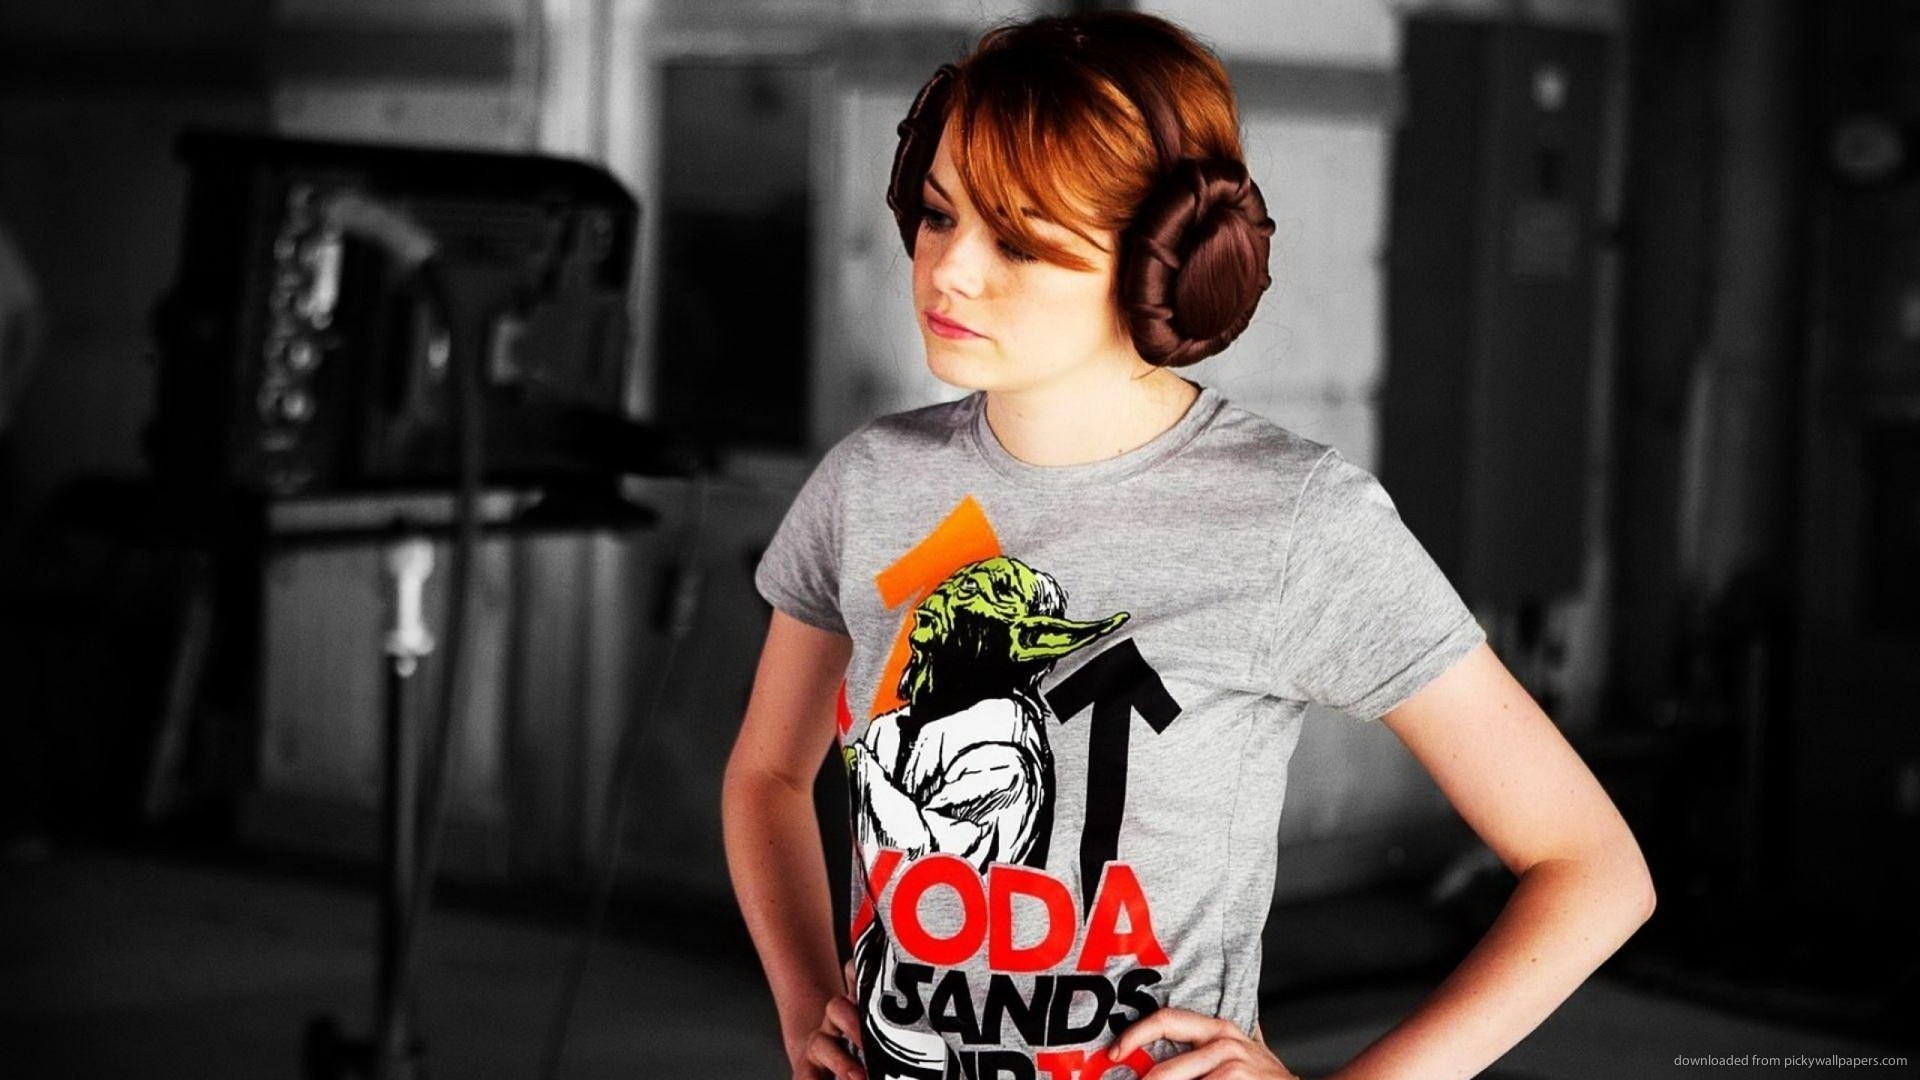 1920x1080 Emma Stone with Princess Leia Hairstyle for 